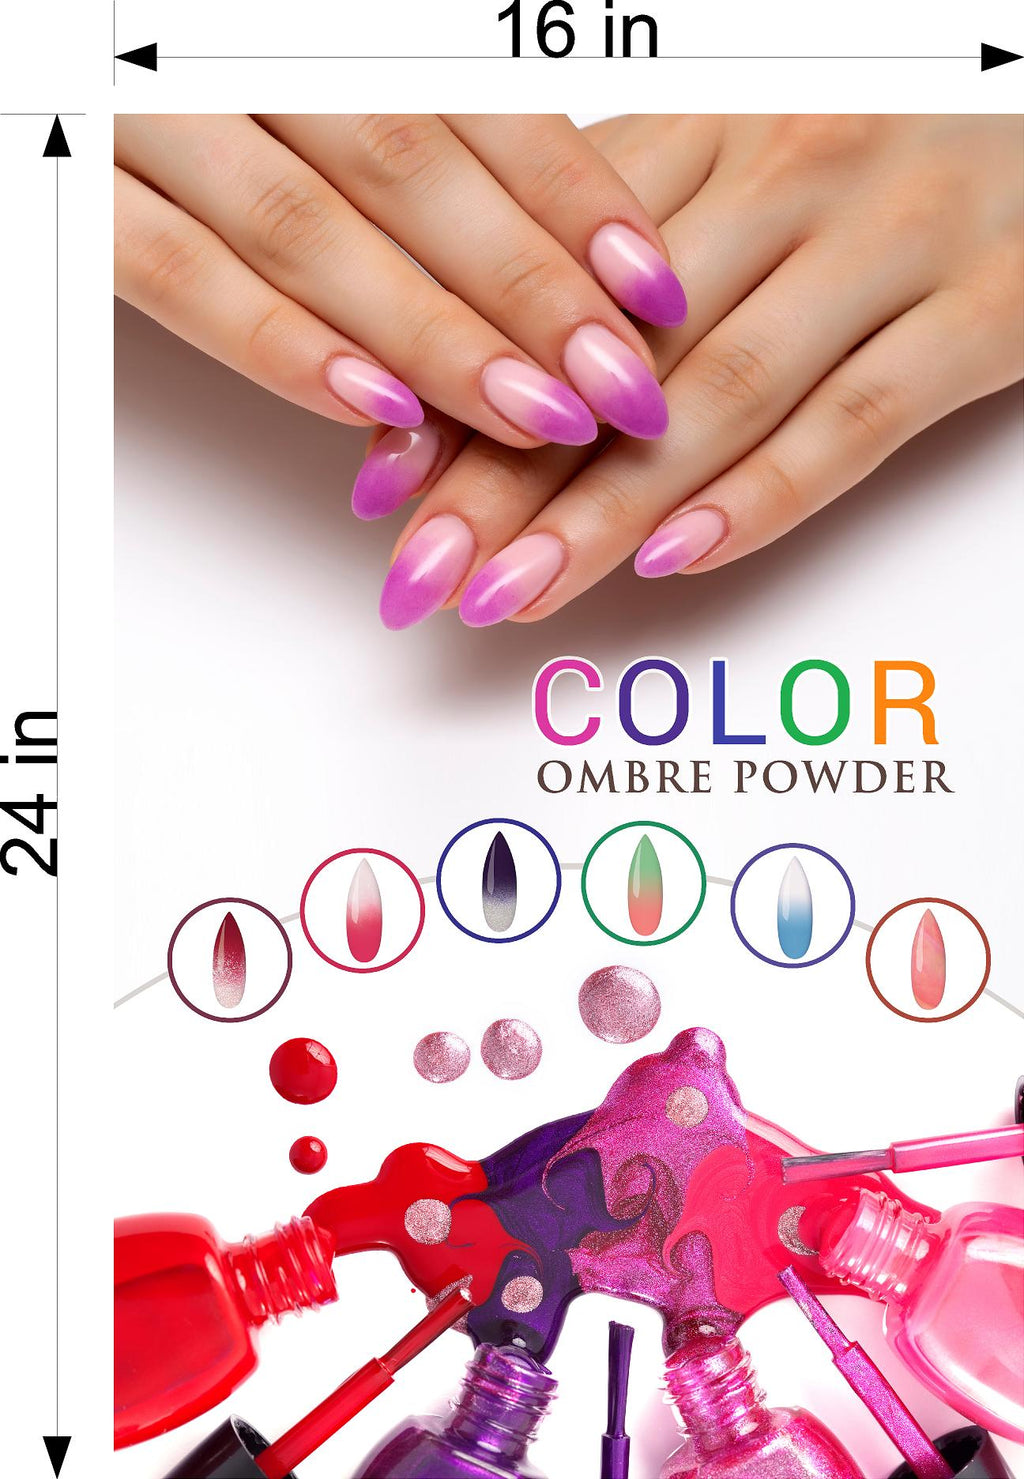 Ombre Nails 03 Perforated Mesh One Way Vision See-Through Window Vinyl Salon Sign Manicure Color Tones Acrylic French Vertical